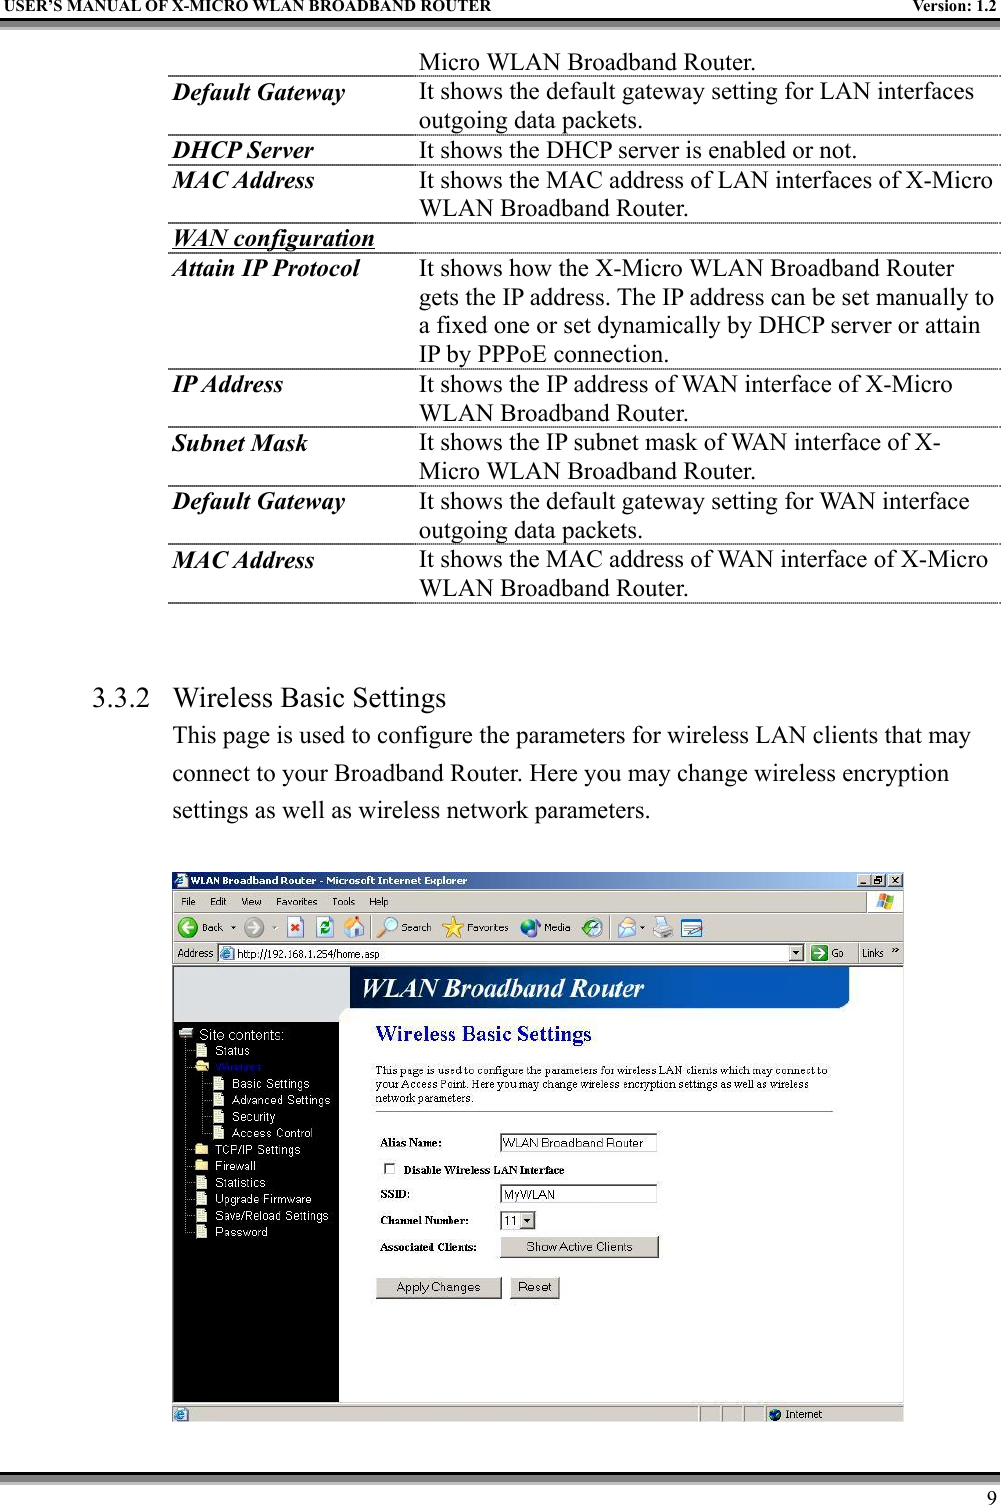 USER’S MANUAL OF X-MICRO WLAN BROADBAND ROUTER Version: 1.29Micro WLAN Broadband Router.Default Gateway It shows the default gateway setting for LAN interfacesoutgoing data packets.DHCP Server It shows the DHCP server is enabled or not.MAC Address It shows the MAC address of LAN interfaces of X-MicroWLAN Broadband Router.WAN configurationAttain IP Protocol It shows how the X-Micro WLAN Broadband Routergets the IP address. The IP address can be set manually toa fixed one or set dynamically by DHCP server or attainIP by PPPoE connection.IP Address It shows the IP address of WAN interface of X-MicroWLAN Broadband Router.Subnet Mask It shows the IP subnet mask of WAN interface of X-Micro WLAN Broadband Router.Default Gateway It shows the default gateway setting for WAN interfaceoutgoing data packets.MAC Address It shows the MAC address of WAN interface of X-MicroWLAN Broadband Router.3.3.2 Wireless Basic SettingsThis page is used to configure the parameters for wireless LAN clients that mayconnect to your Broadband Router. Here you may change wireless encryptionsettings as well as wireless network parameters.